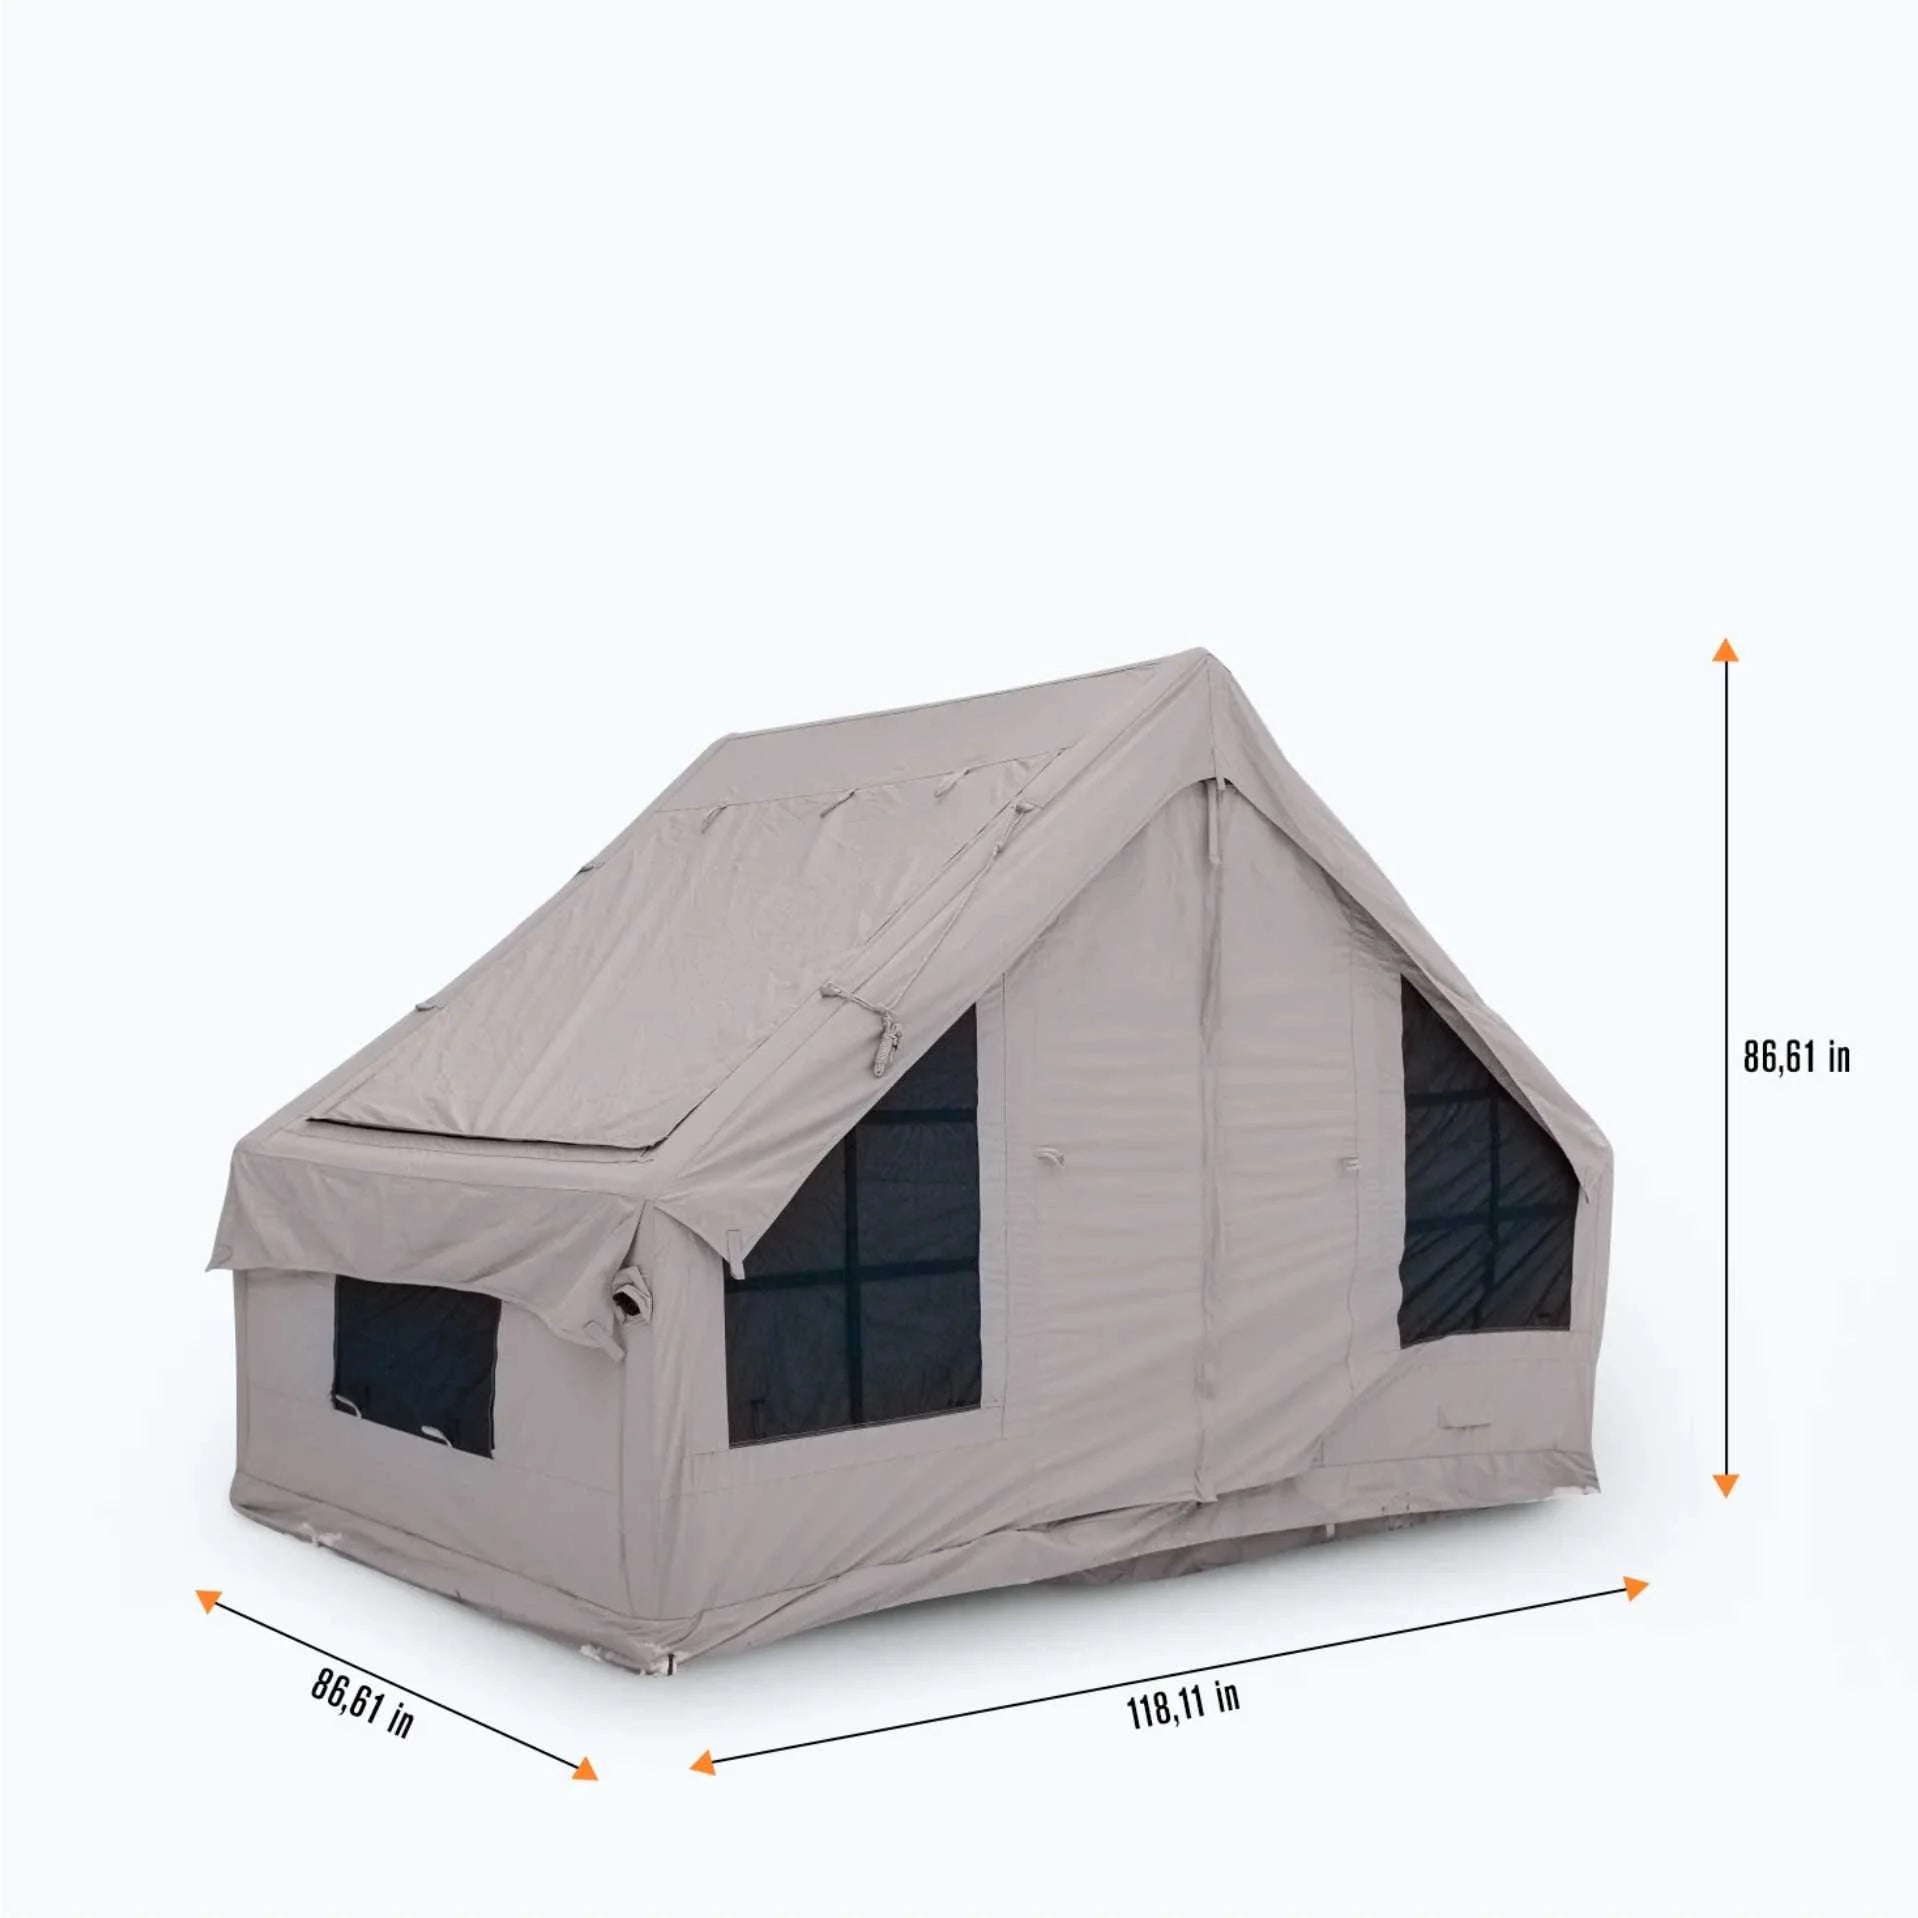 Premium Inflatable Tent with Stove Jack Panda air Large. Best for 1-6  person.